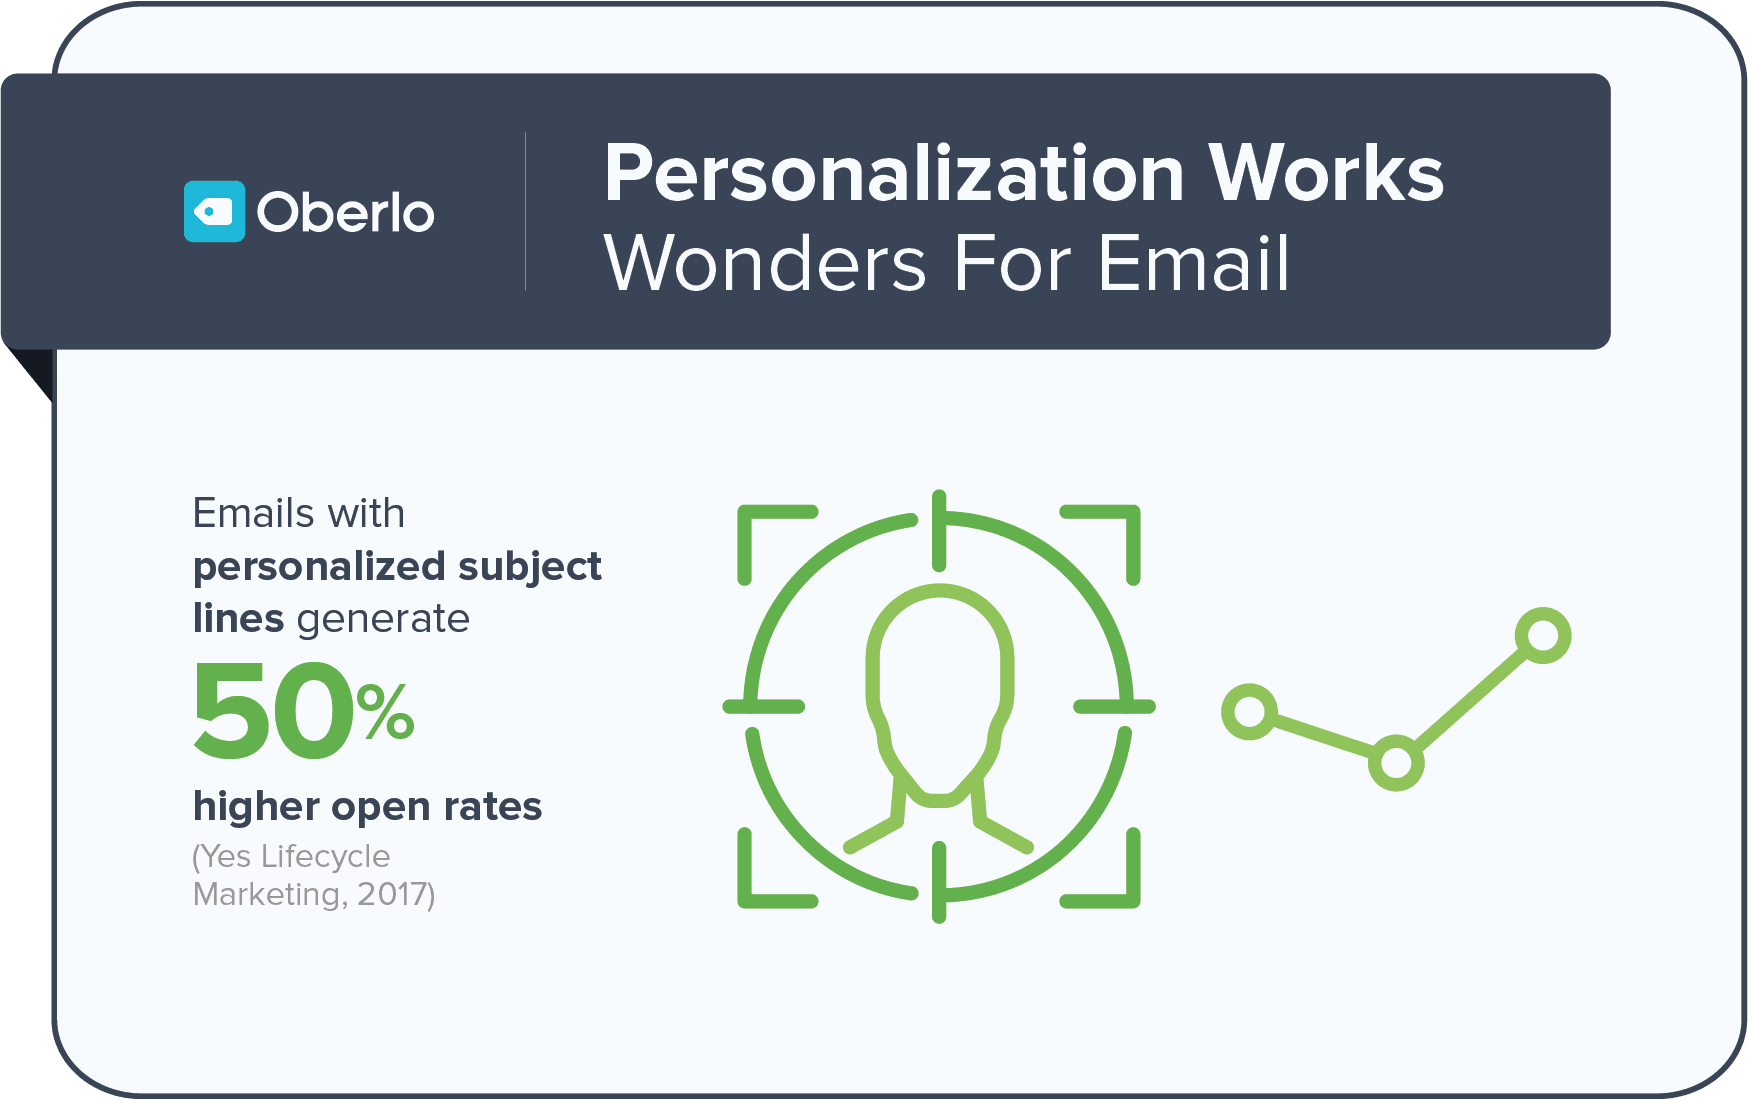 marketermagic-livepic-email-personalization